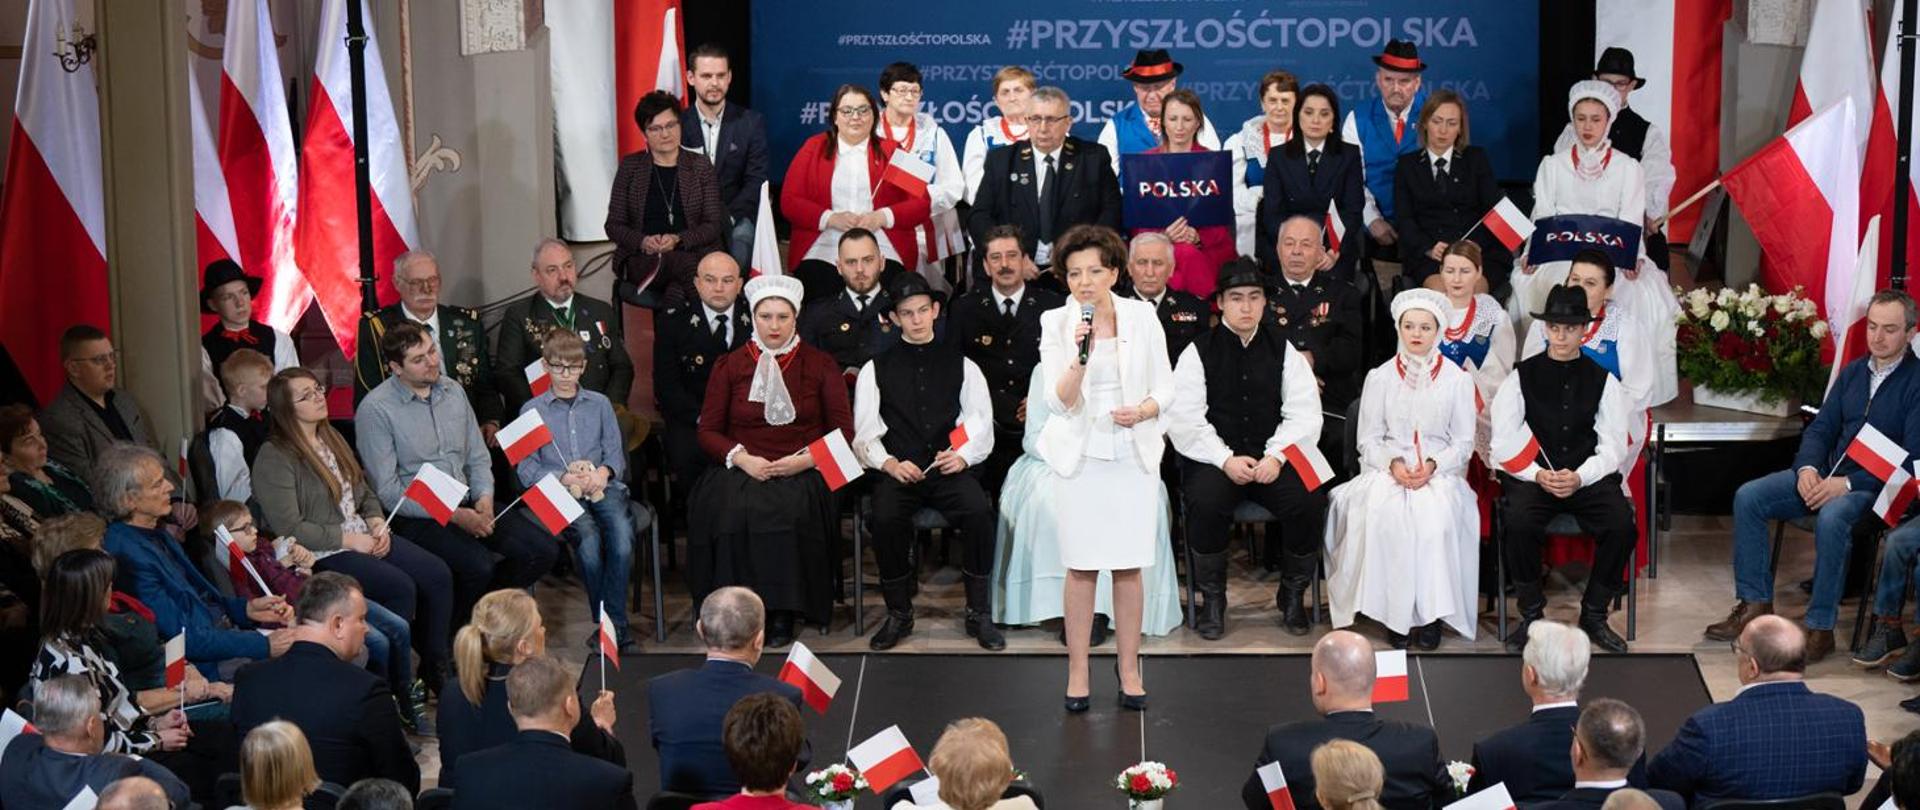 Ministry of Family and Social Policy: The future is family, the future is Poland